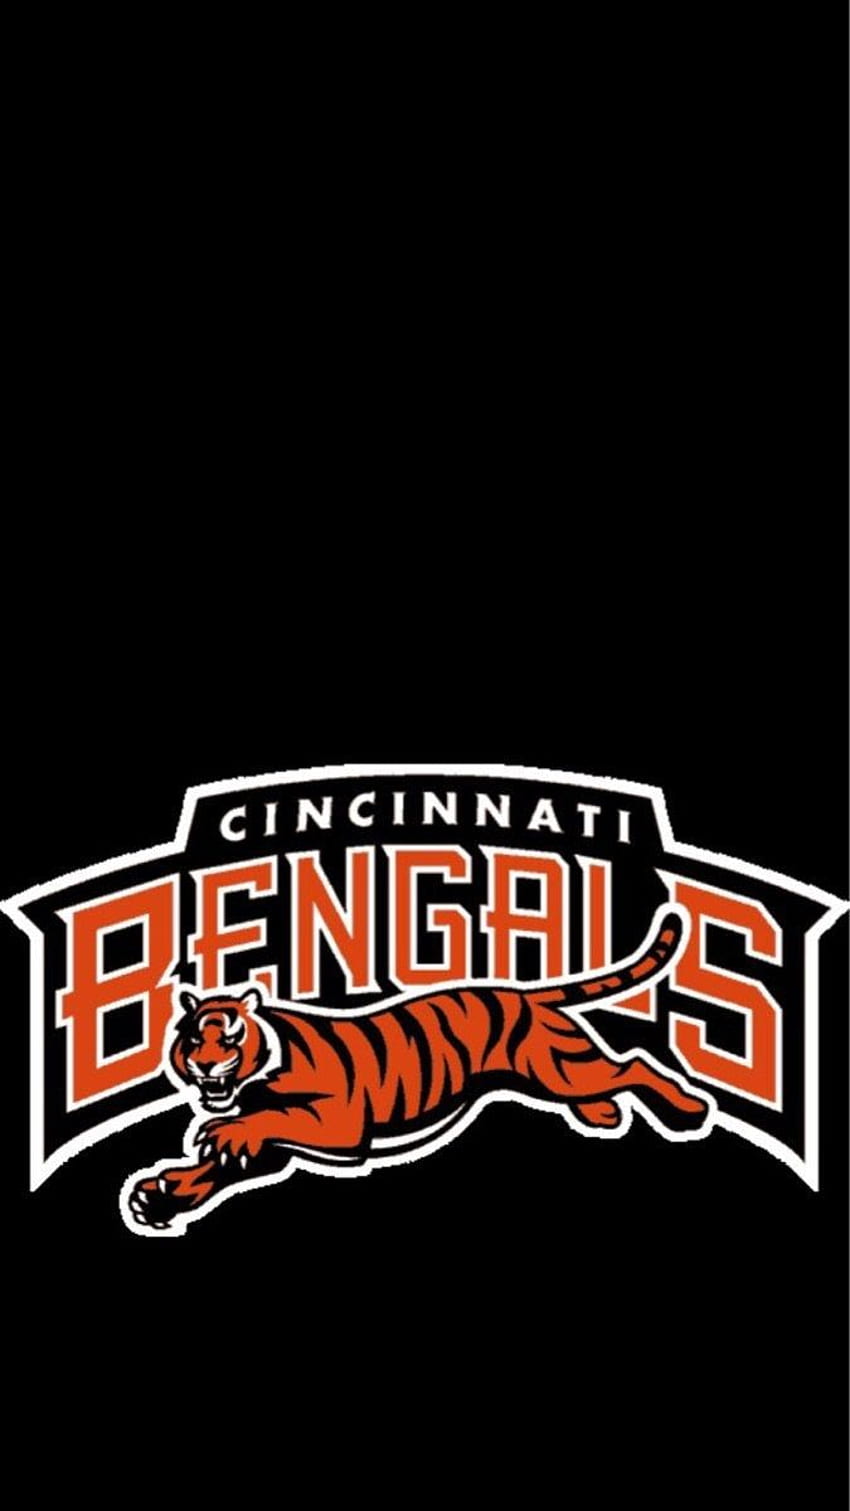 Work In Progress IPhone . Has Anyone Seen This Logo In A Higher Resolution Anywhere? : R Bengals HD phone wallpaper